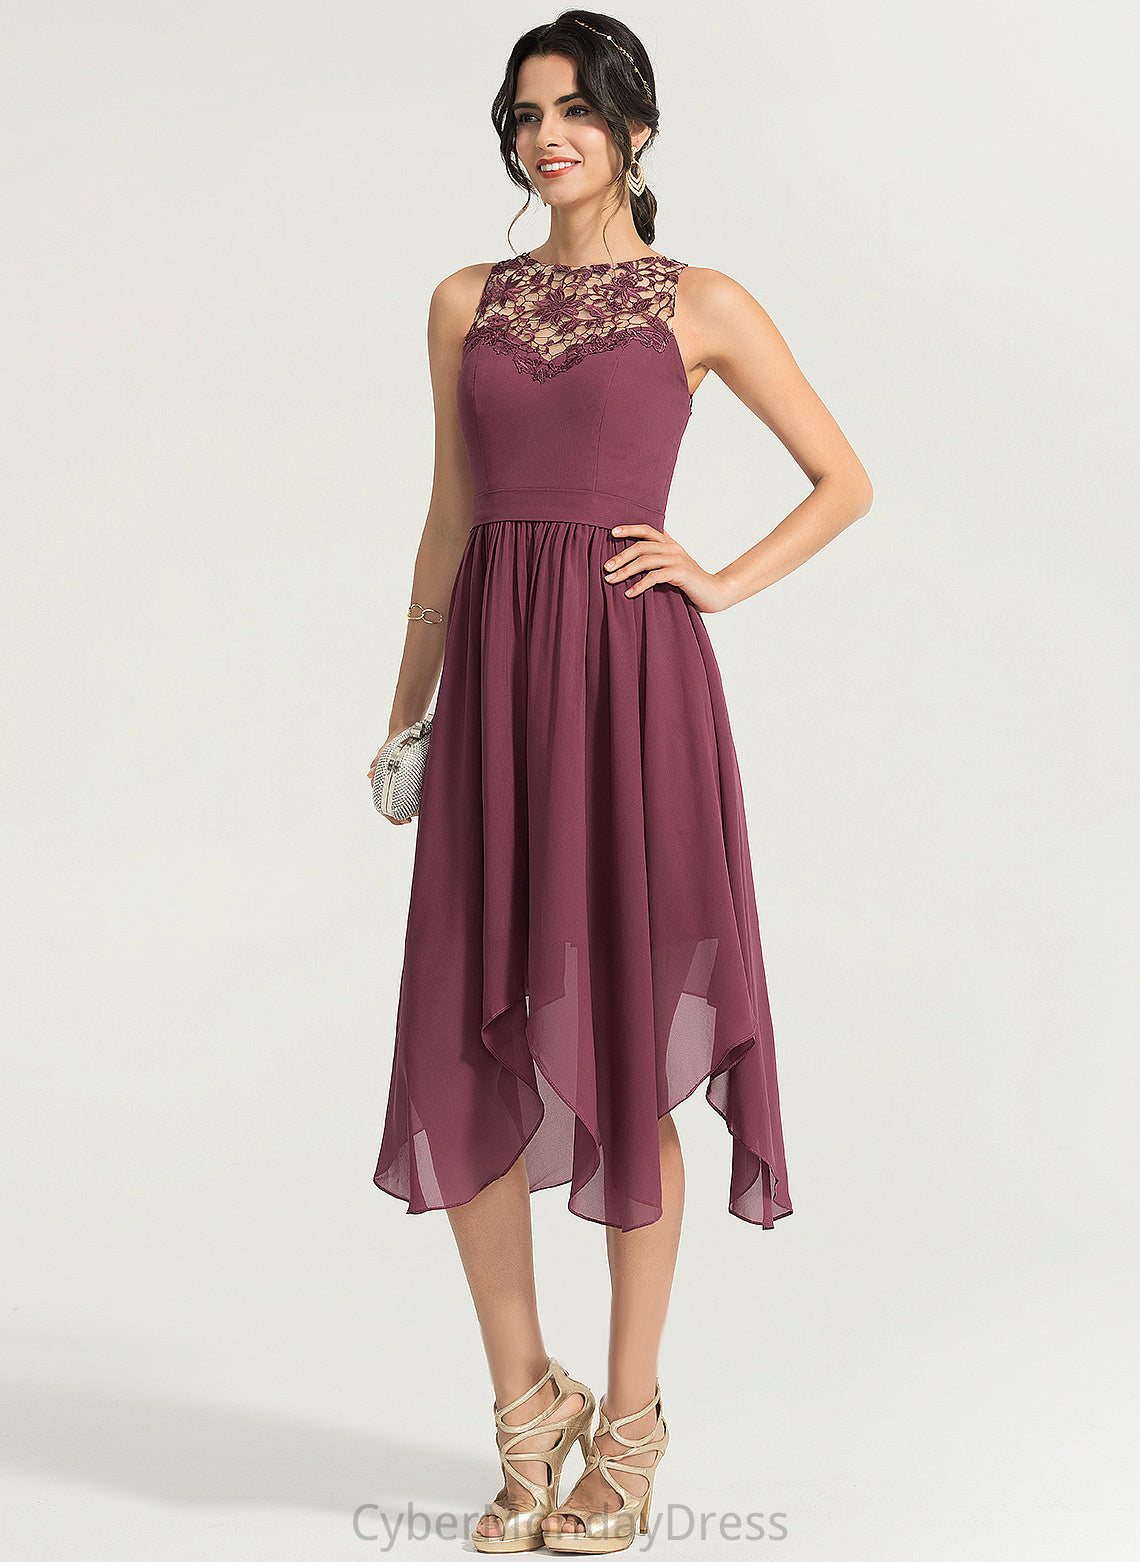 A-Line Lace Cocktail Dresses Asymmetrical Scoop Chiffon Dress Neck Marlee Cocktail